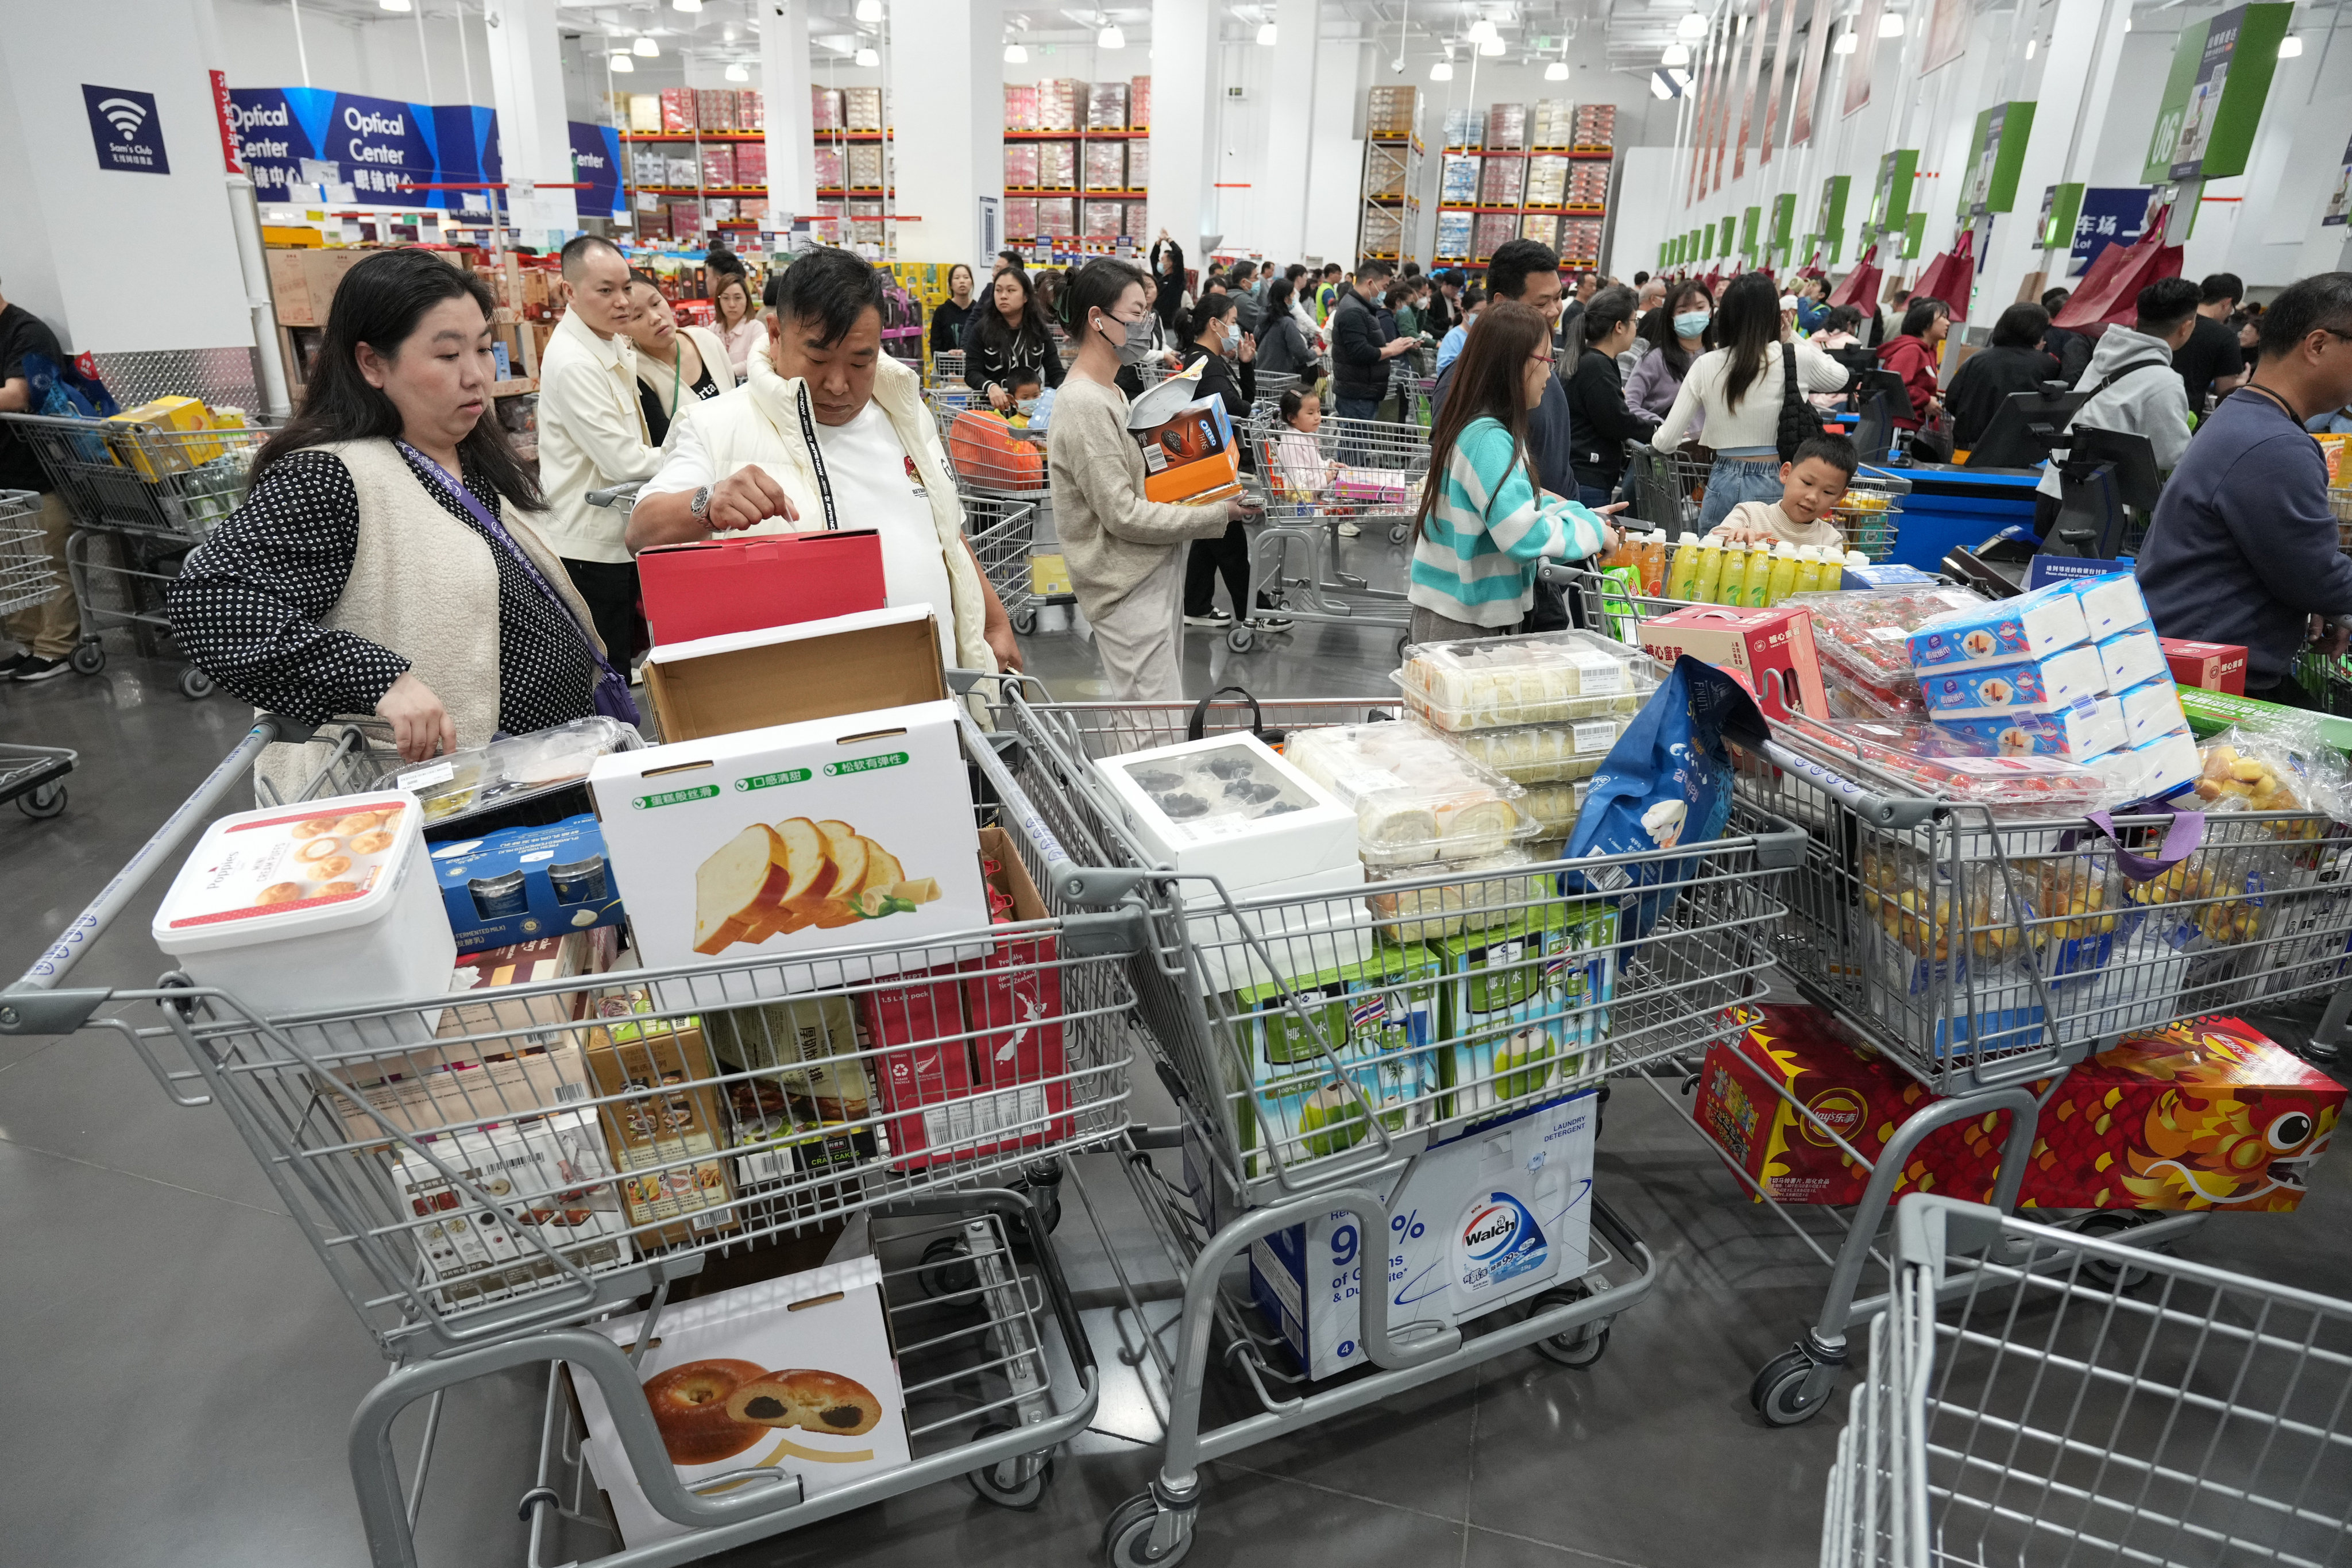 Hongkongers at a Sam’s Club outlet in Shenzhen stock up on goodies. Photo: Eugene Lee